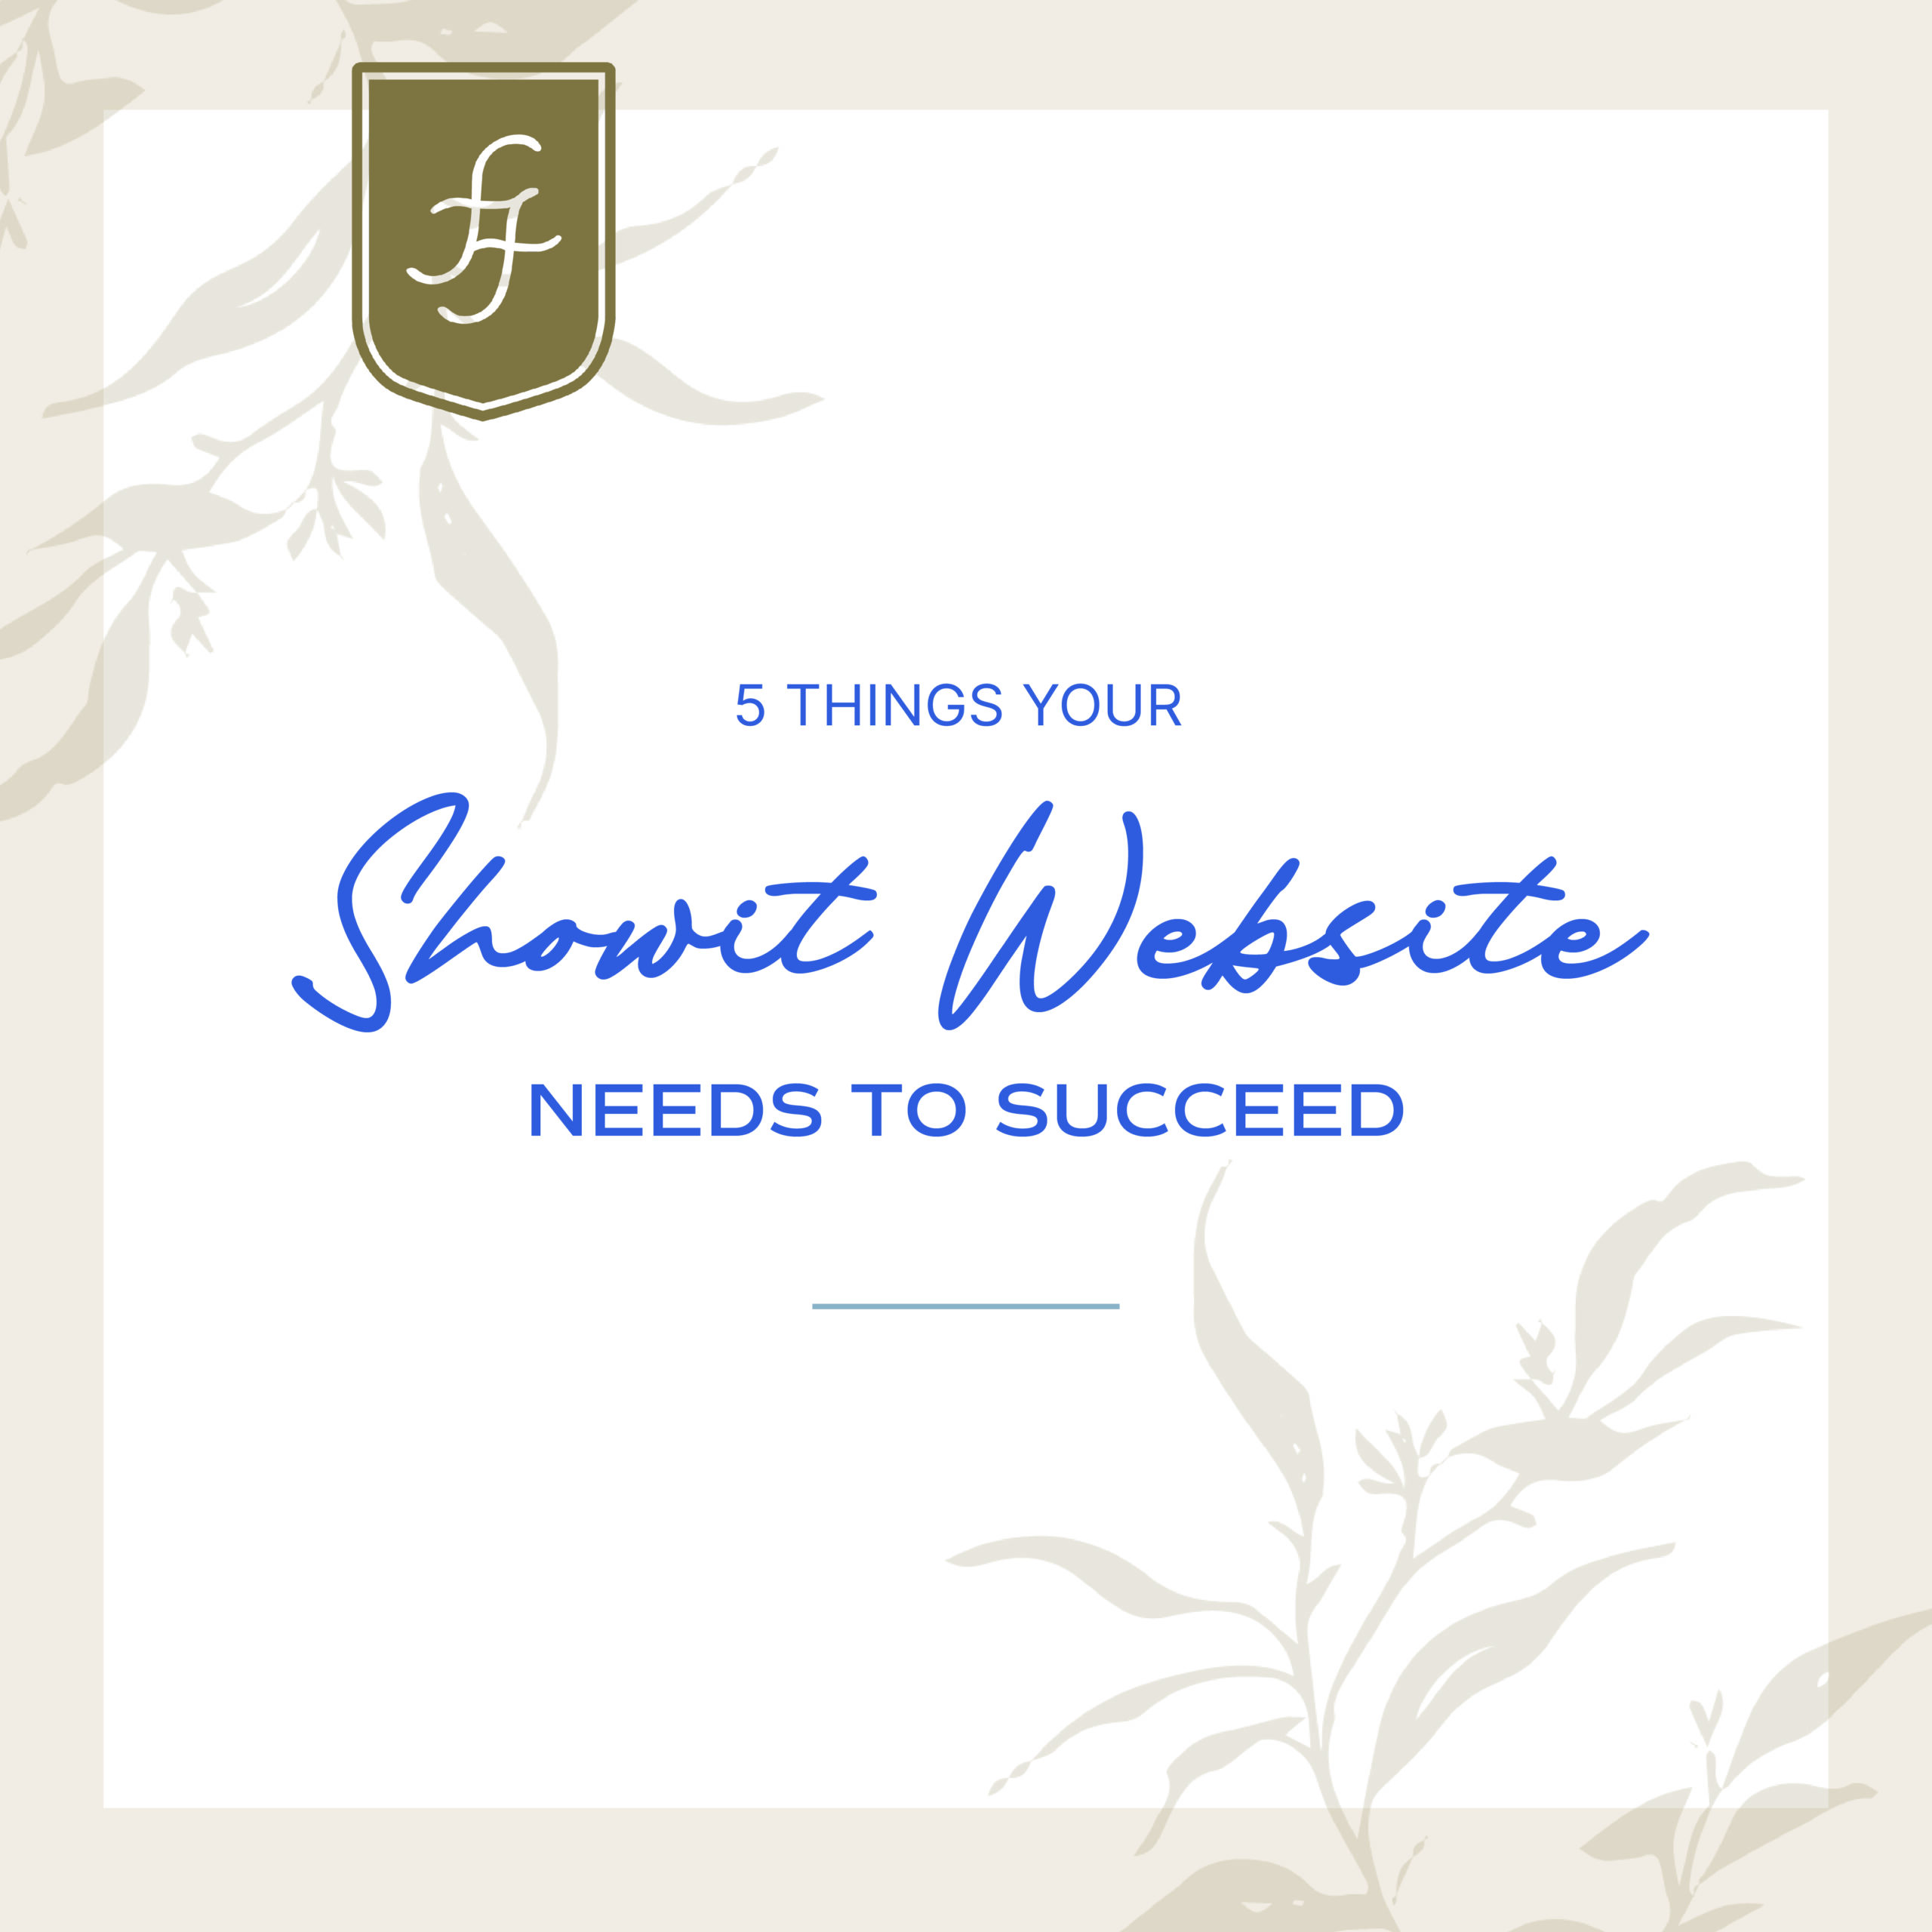 Blog post title graphic reading "5 things your Showit Website needs to succeed" in a royal blue script font. The background is white and tan with pale leafy branches as decoration.